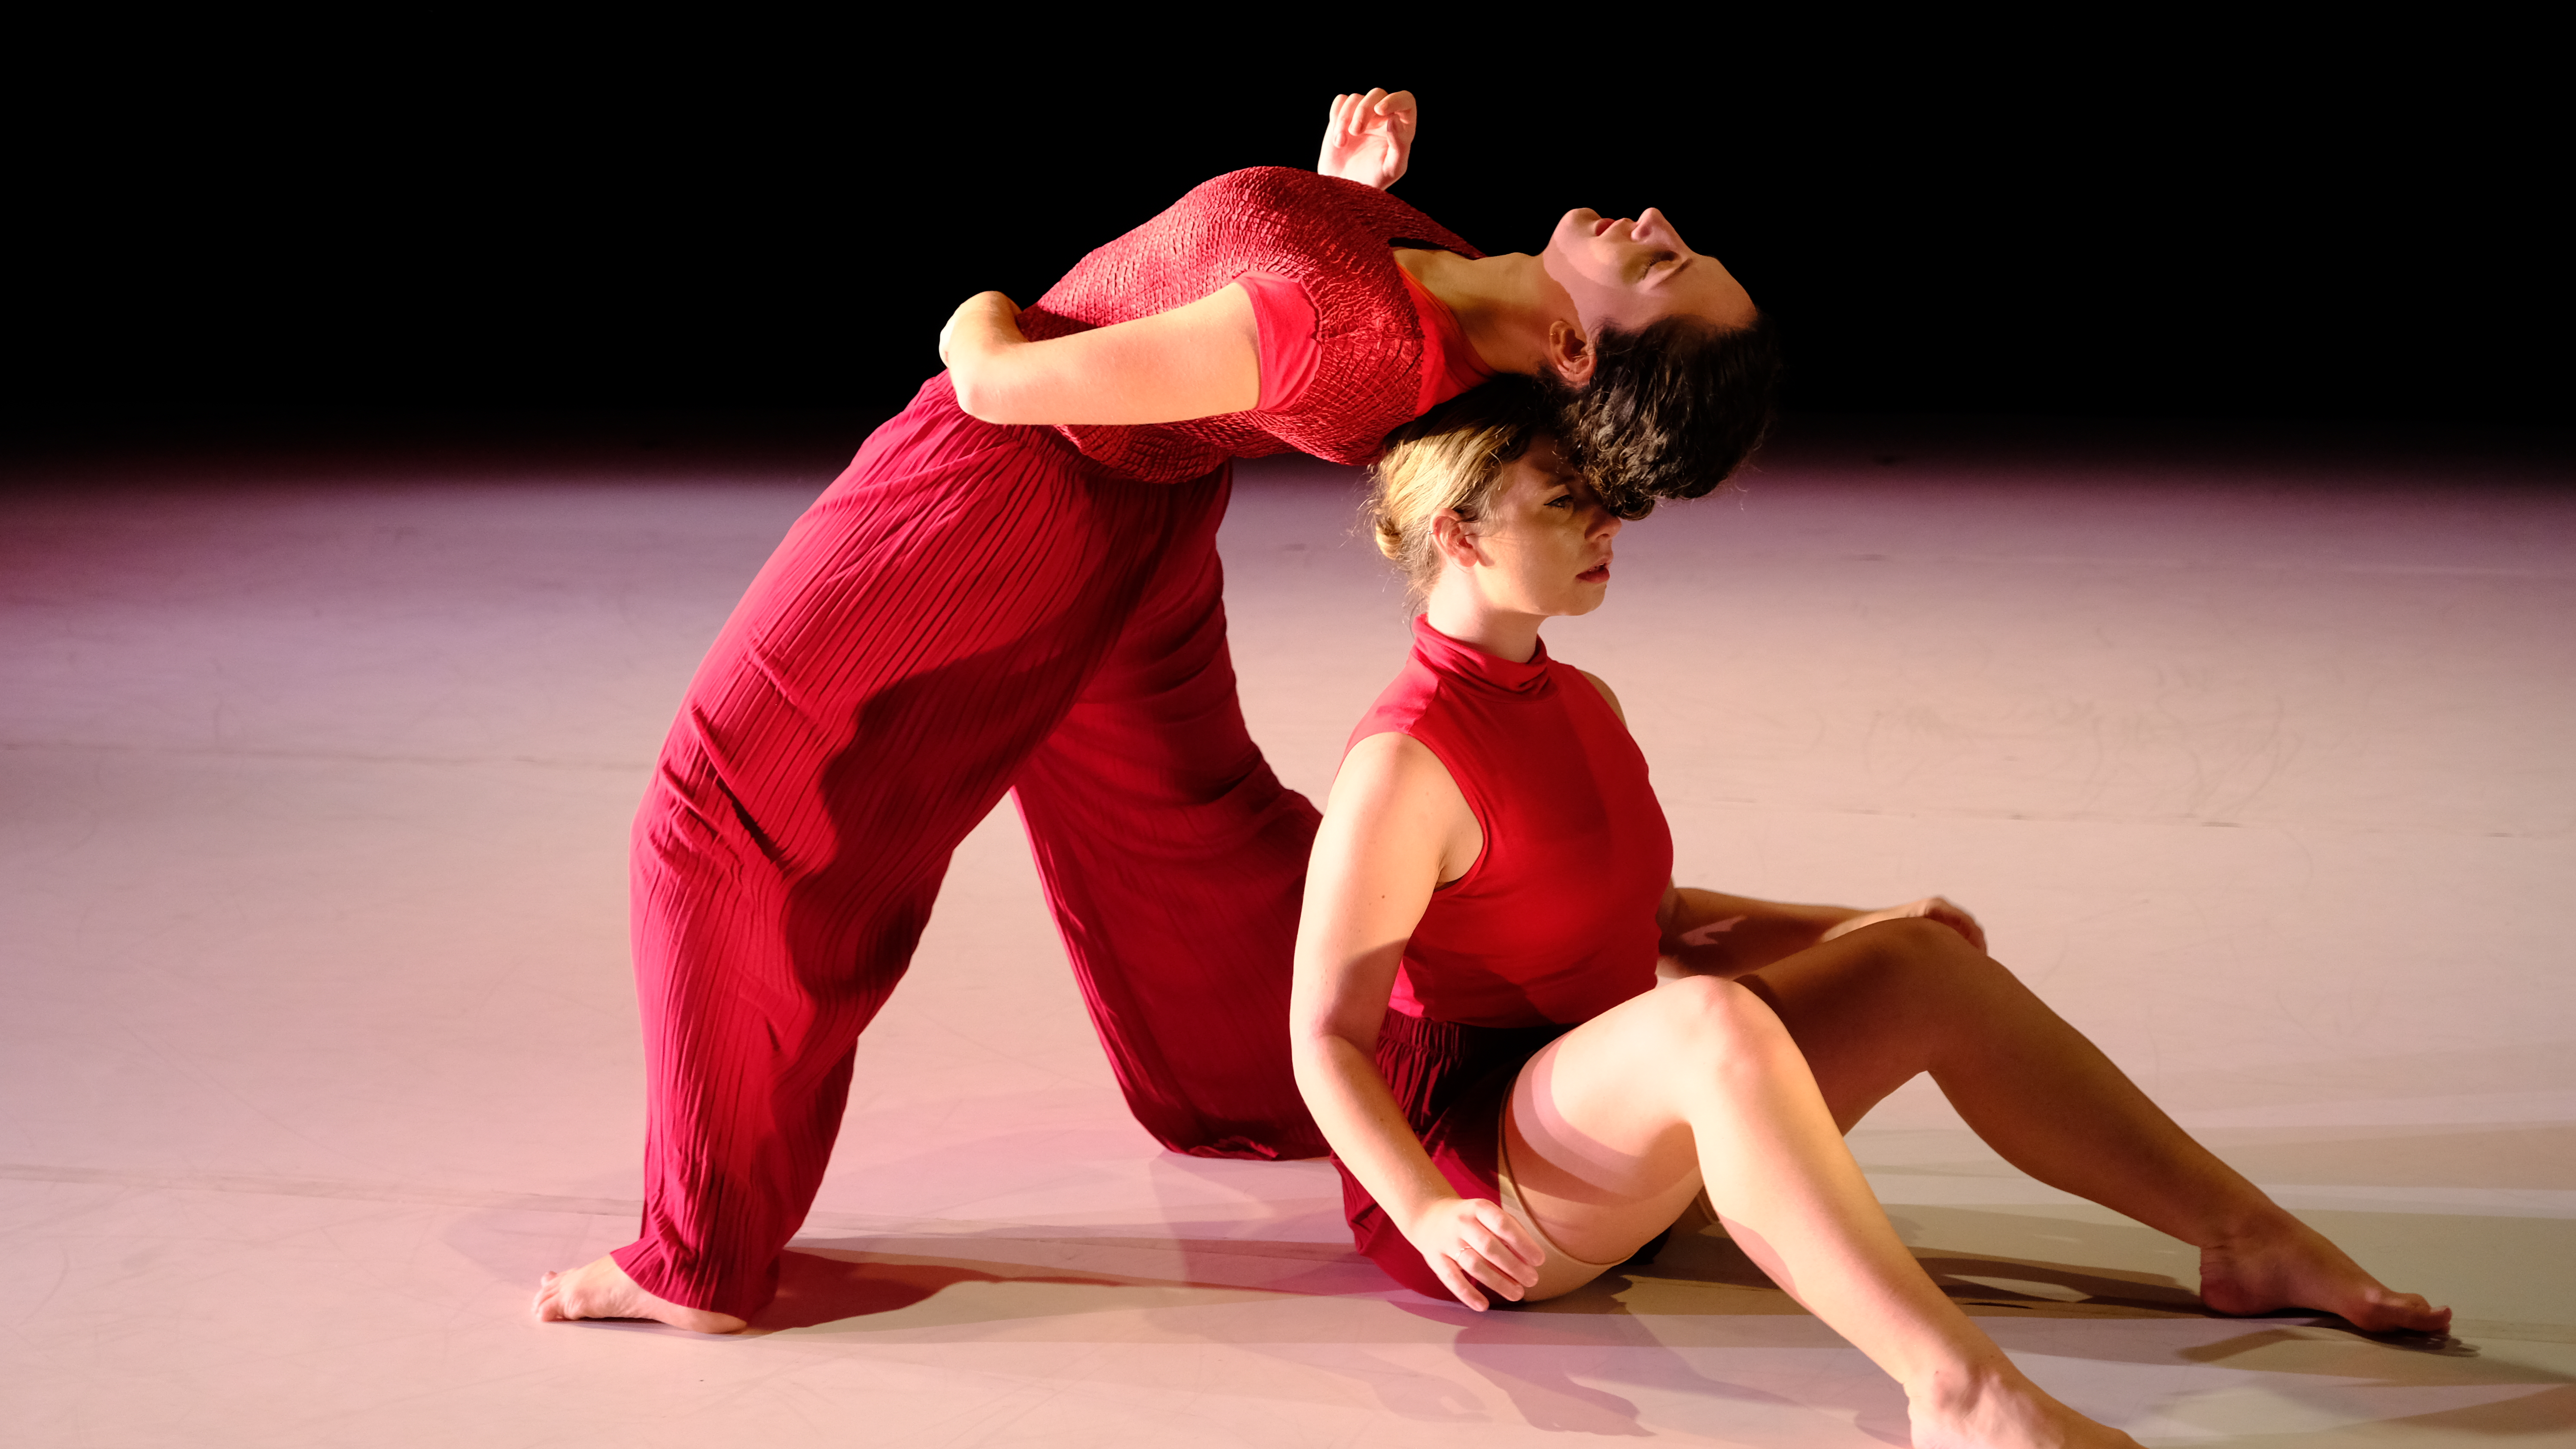 Emory Dance Company Features Provoking, Vulnerable New Works